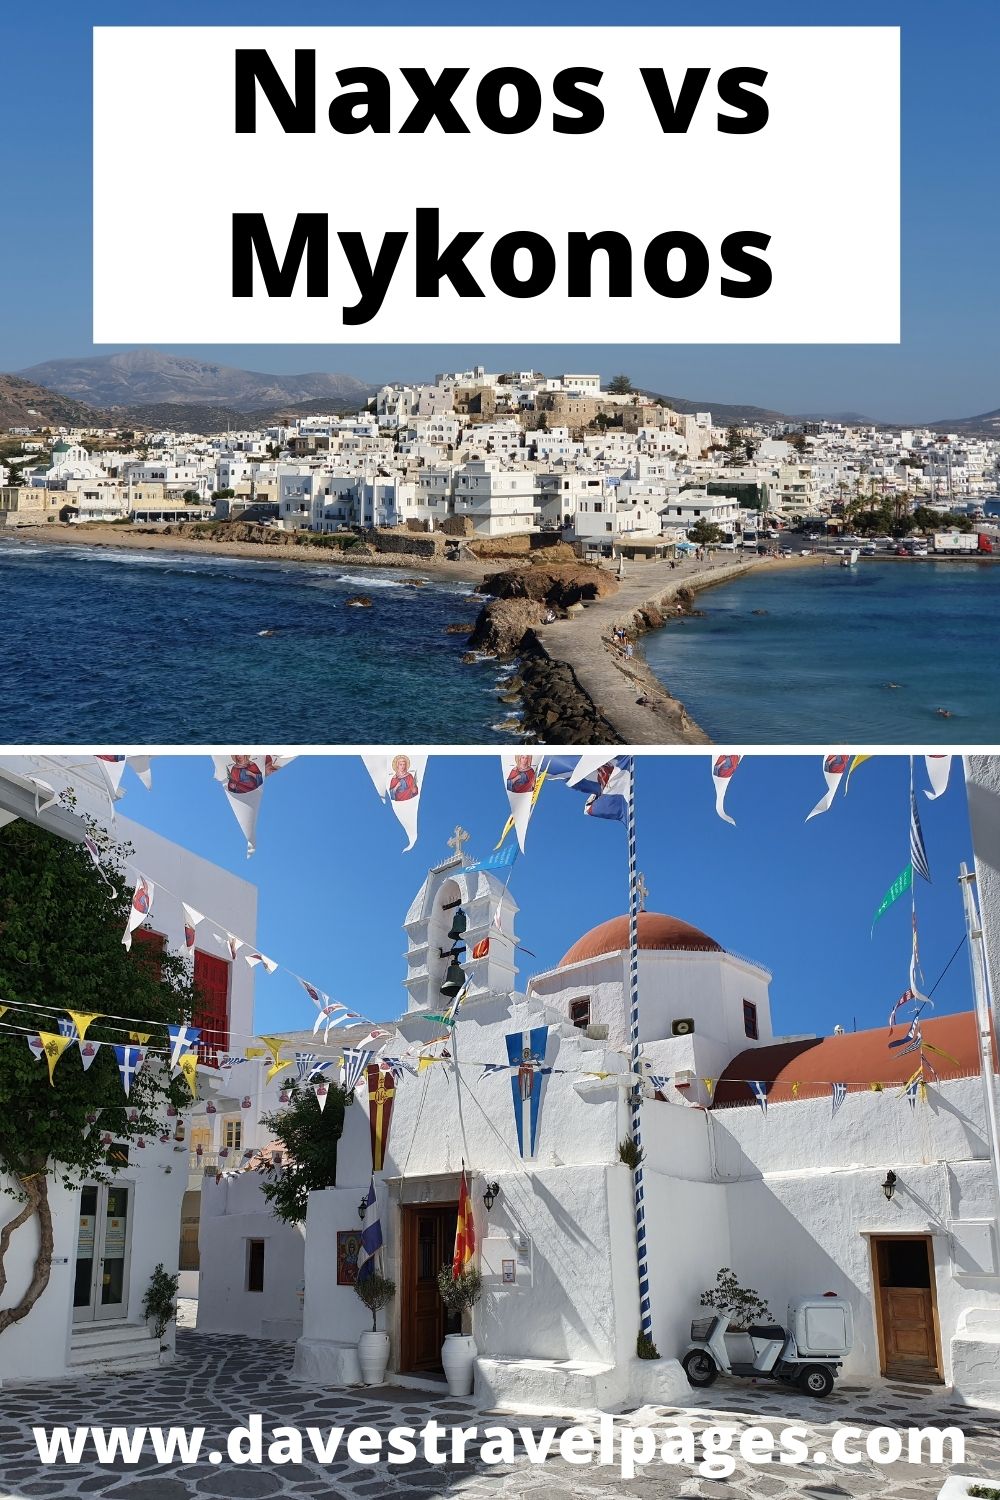 Naxos vs Mykonos - Which island is best and why